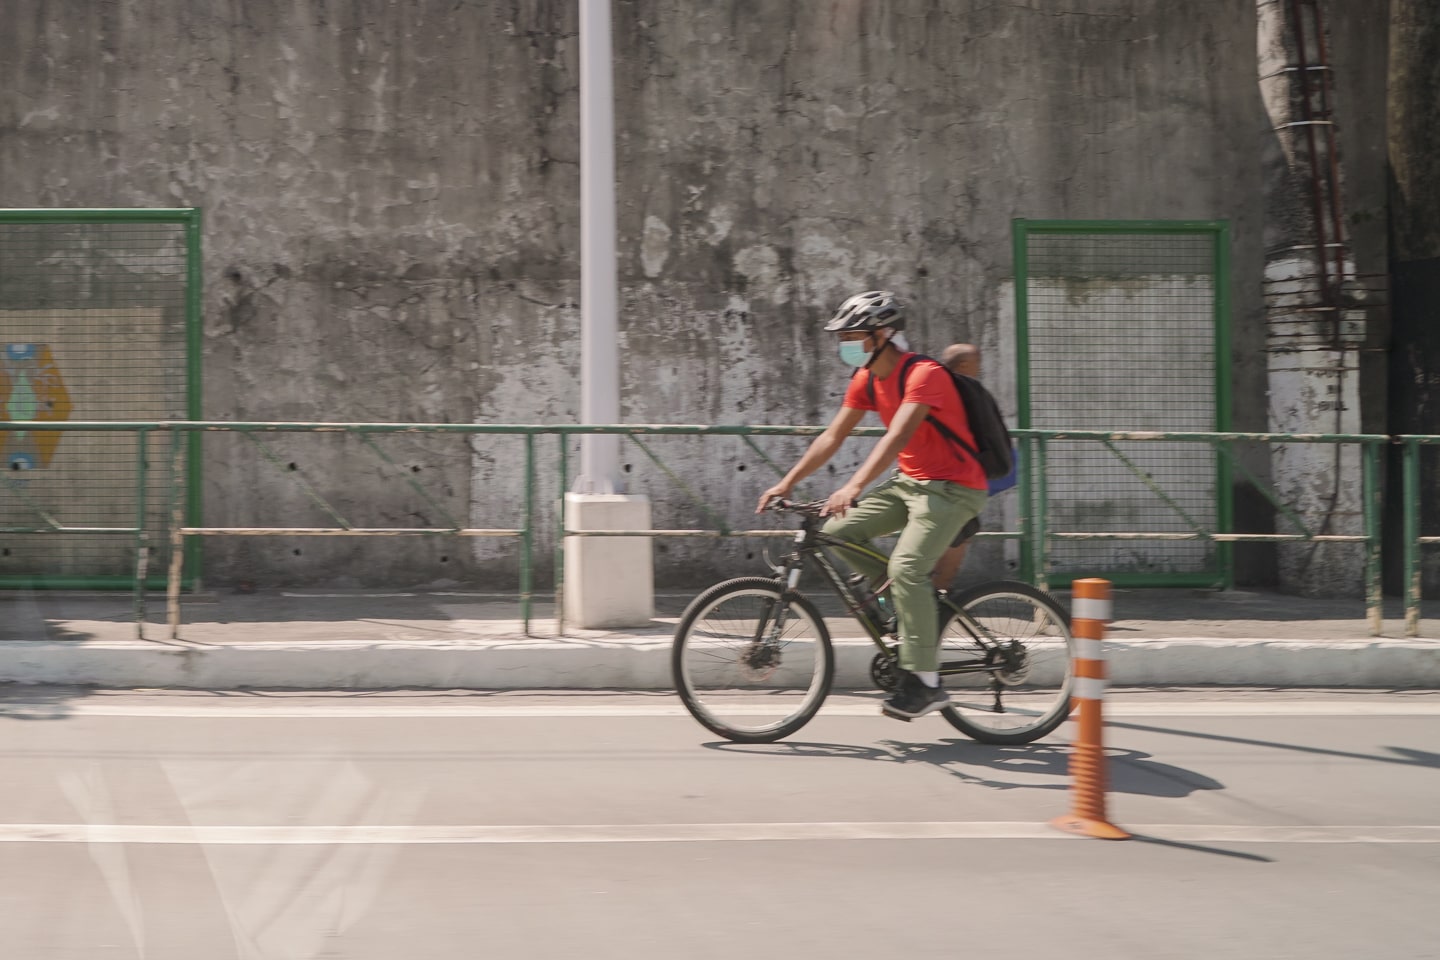 Bike lanes around your school? Residents of Metro Manila can now conveniently check on that